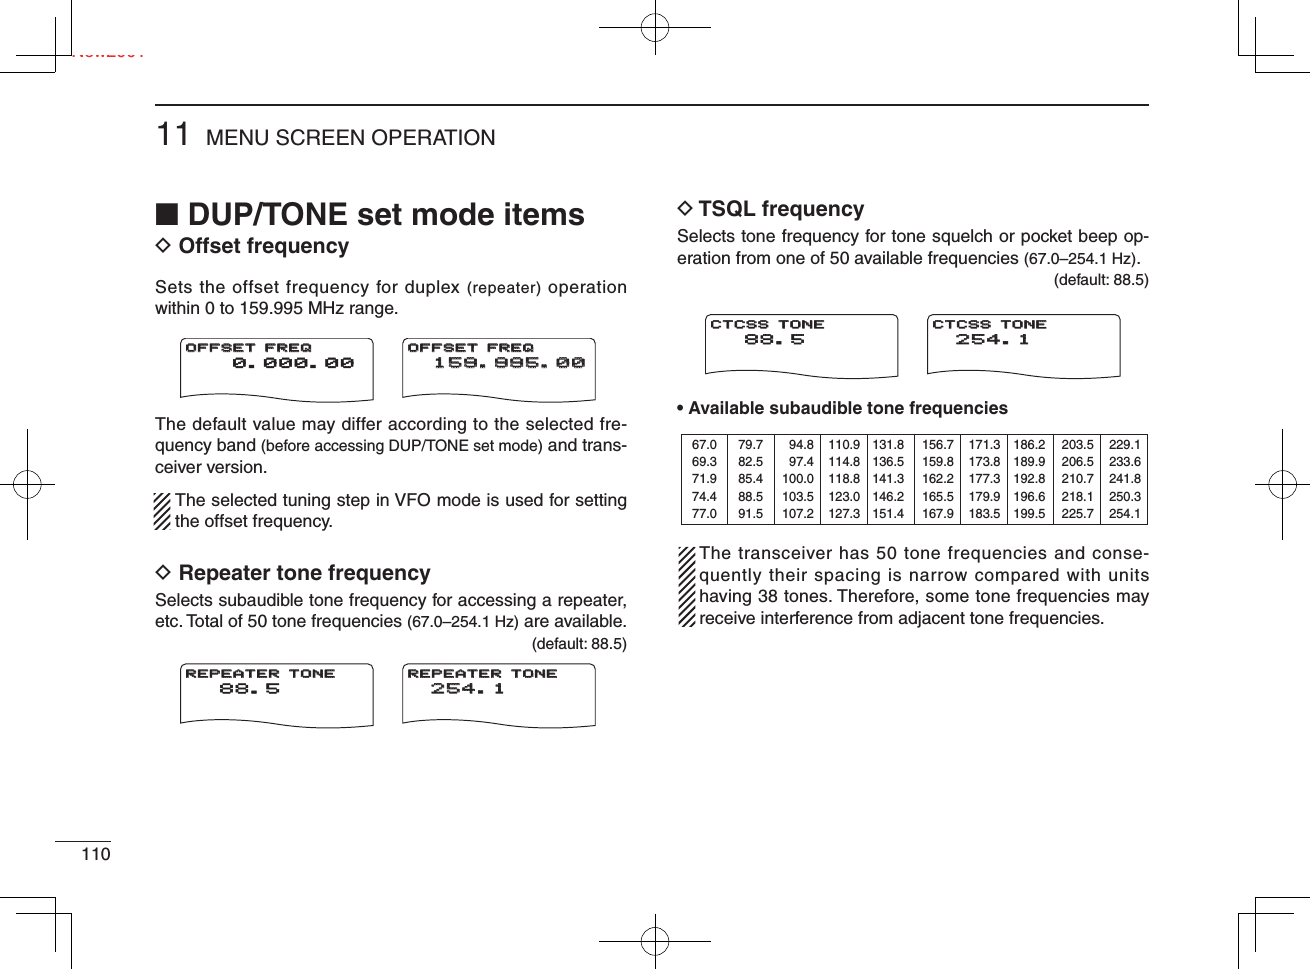 ■ DUP/TONE set mode itemsD Offset frequencySets the offset frequency for duplex (repeater) operation within 0 to 159.995 MHz range.The default value may differ according to the selected fre-quency band (before accessing DUP/TONE set mode) and trans-ceiver version.  The selected tuning step in VFO mode is used for setting the offset frequency.D Repeater tone frequencySelects subaudible tone frequency for accessing a repeater, etc. Total of 50 tone frequencies (67.0–254.1 Hz) are available. (default: 88.5)D TSQL frequencySelects tone frequency for tone squelch or pocket beep op-eration from one of 50 available frequencies (67.0–254.1 Hz). (default: 88.5)• Available subaudible tone frequencies   The transceiver has 50 tone frequencies and conse-quently their spacing is narrow compared with units having 38 tones. Therefore, some tone frequencies may receive interference from adjacent tone frequencies.MENU SCREEN OPERATION11011New2001  0.000.00OFFSET FREQOFFSET FREQ159.995.00159.995.00OFFSET FREQOFFSET FREQ 88.5REPEATER TONEREPEATER TONE254.1254.1REPEATER TONEREPEATER TONE 88.5CTCSS TONECTCSS TONE254.1254.1CTCSS TONECTCSS TONE67.069.371.974.477.079.782.585.488.591.594.897.4100.0103.5107.2110.9114.8118.8123.0127.3131.8136.5141.3146.2151.4156.7159.8162.2165.5167.9171.3173.8177.3179.9183.5186.2189.9192.8196.6199.5203.5206.5210.7218.1225.7229.1233.6241.8250.3254.1Ne